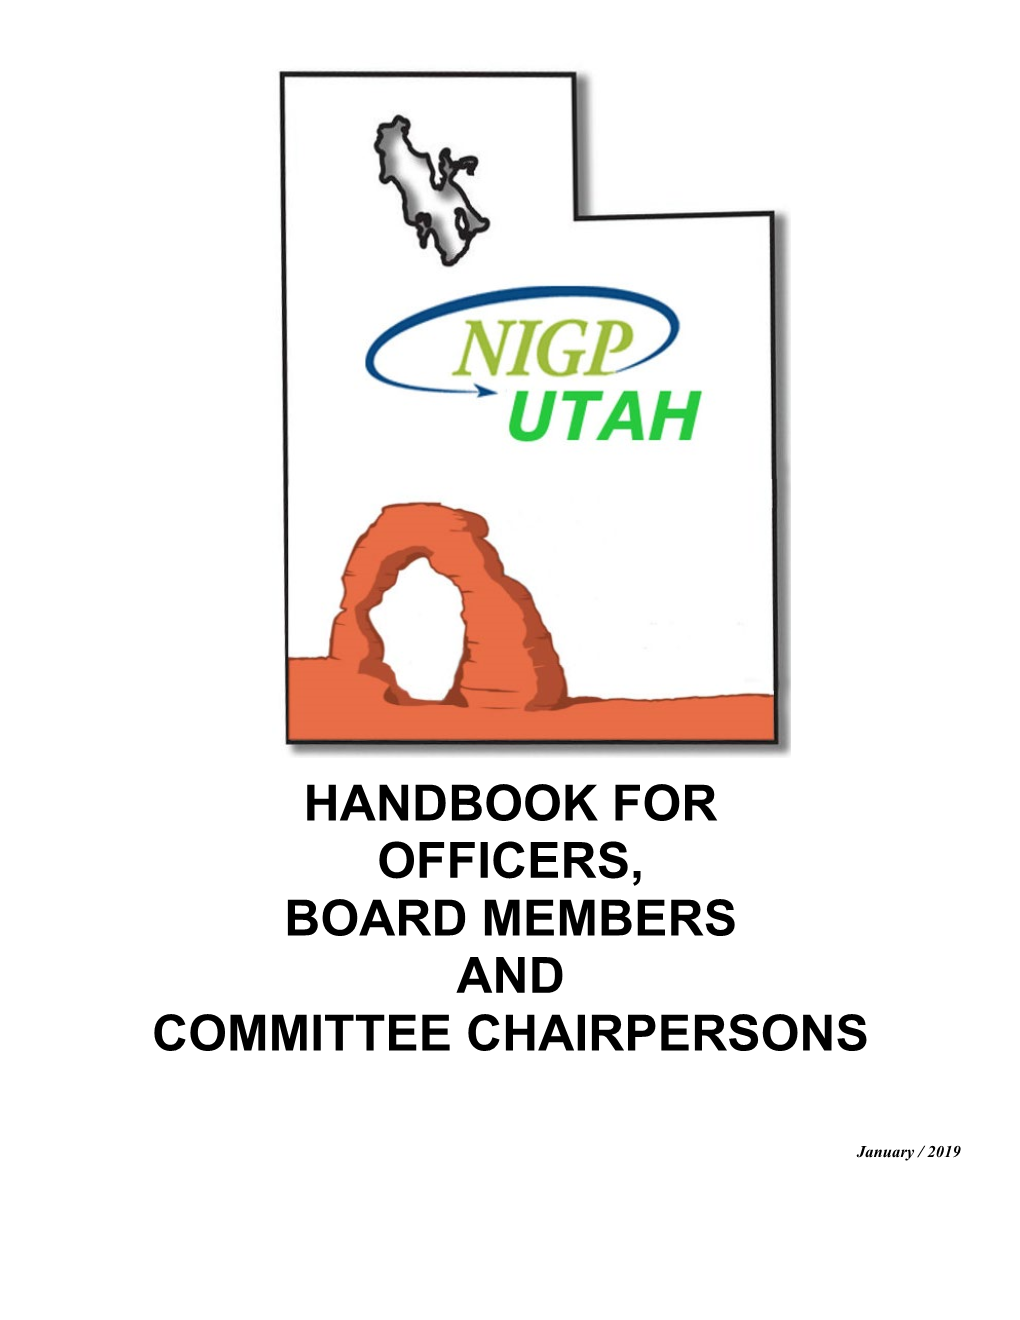 Handbook for Officers, Board Members and Committee Chairpersons